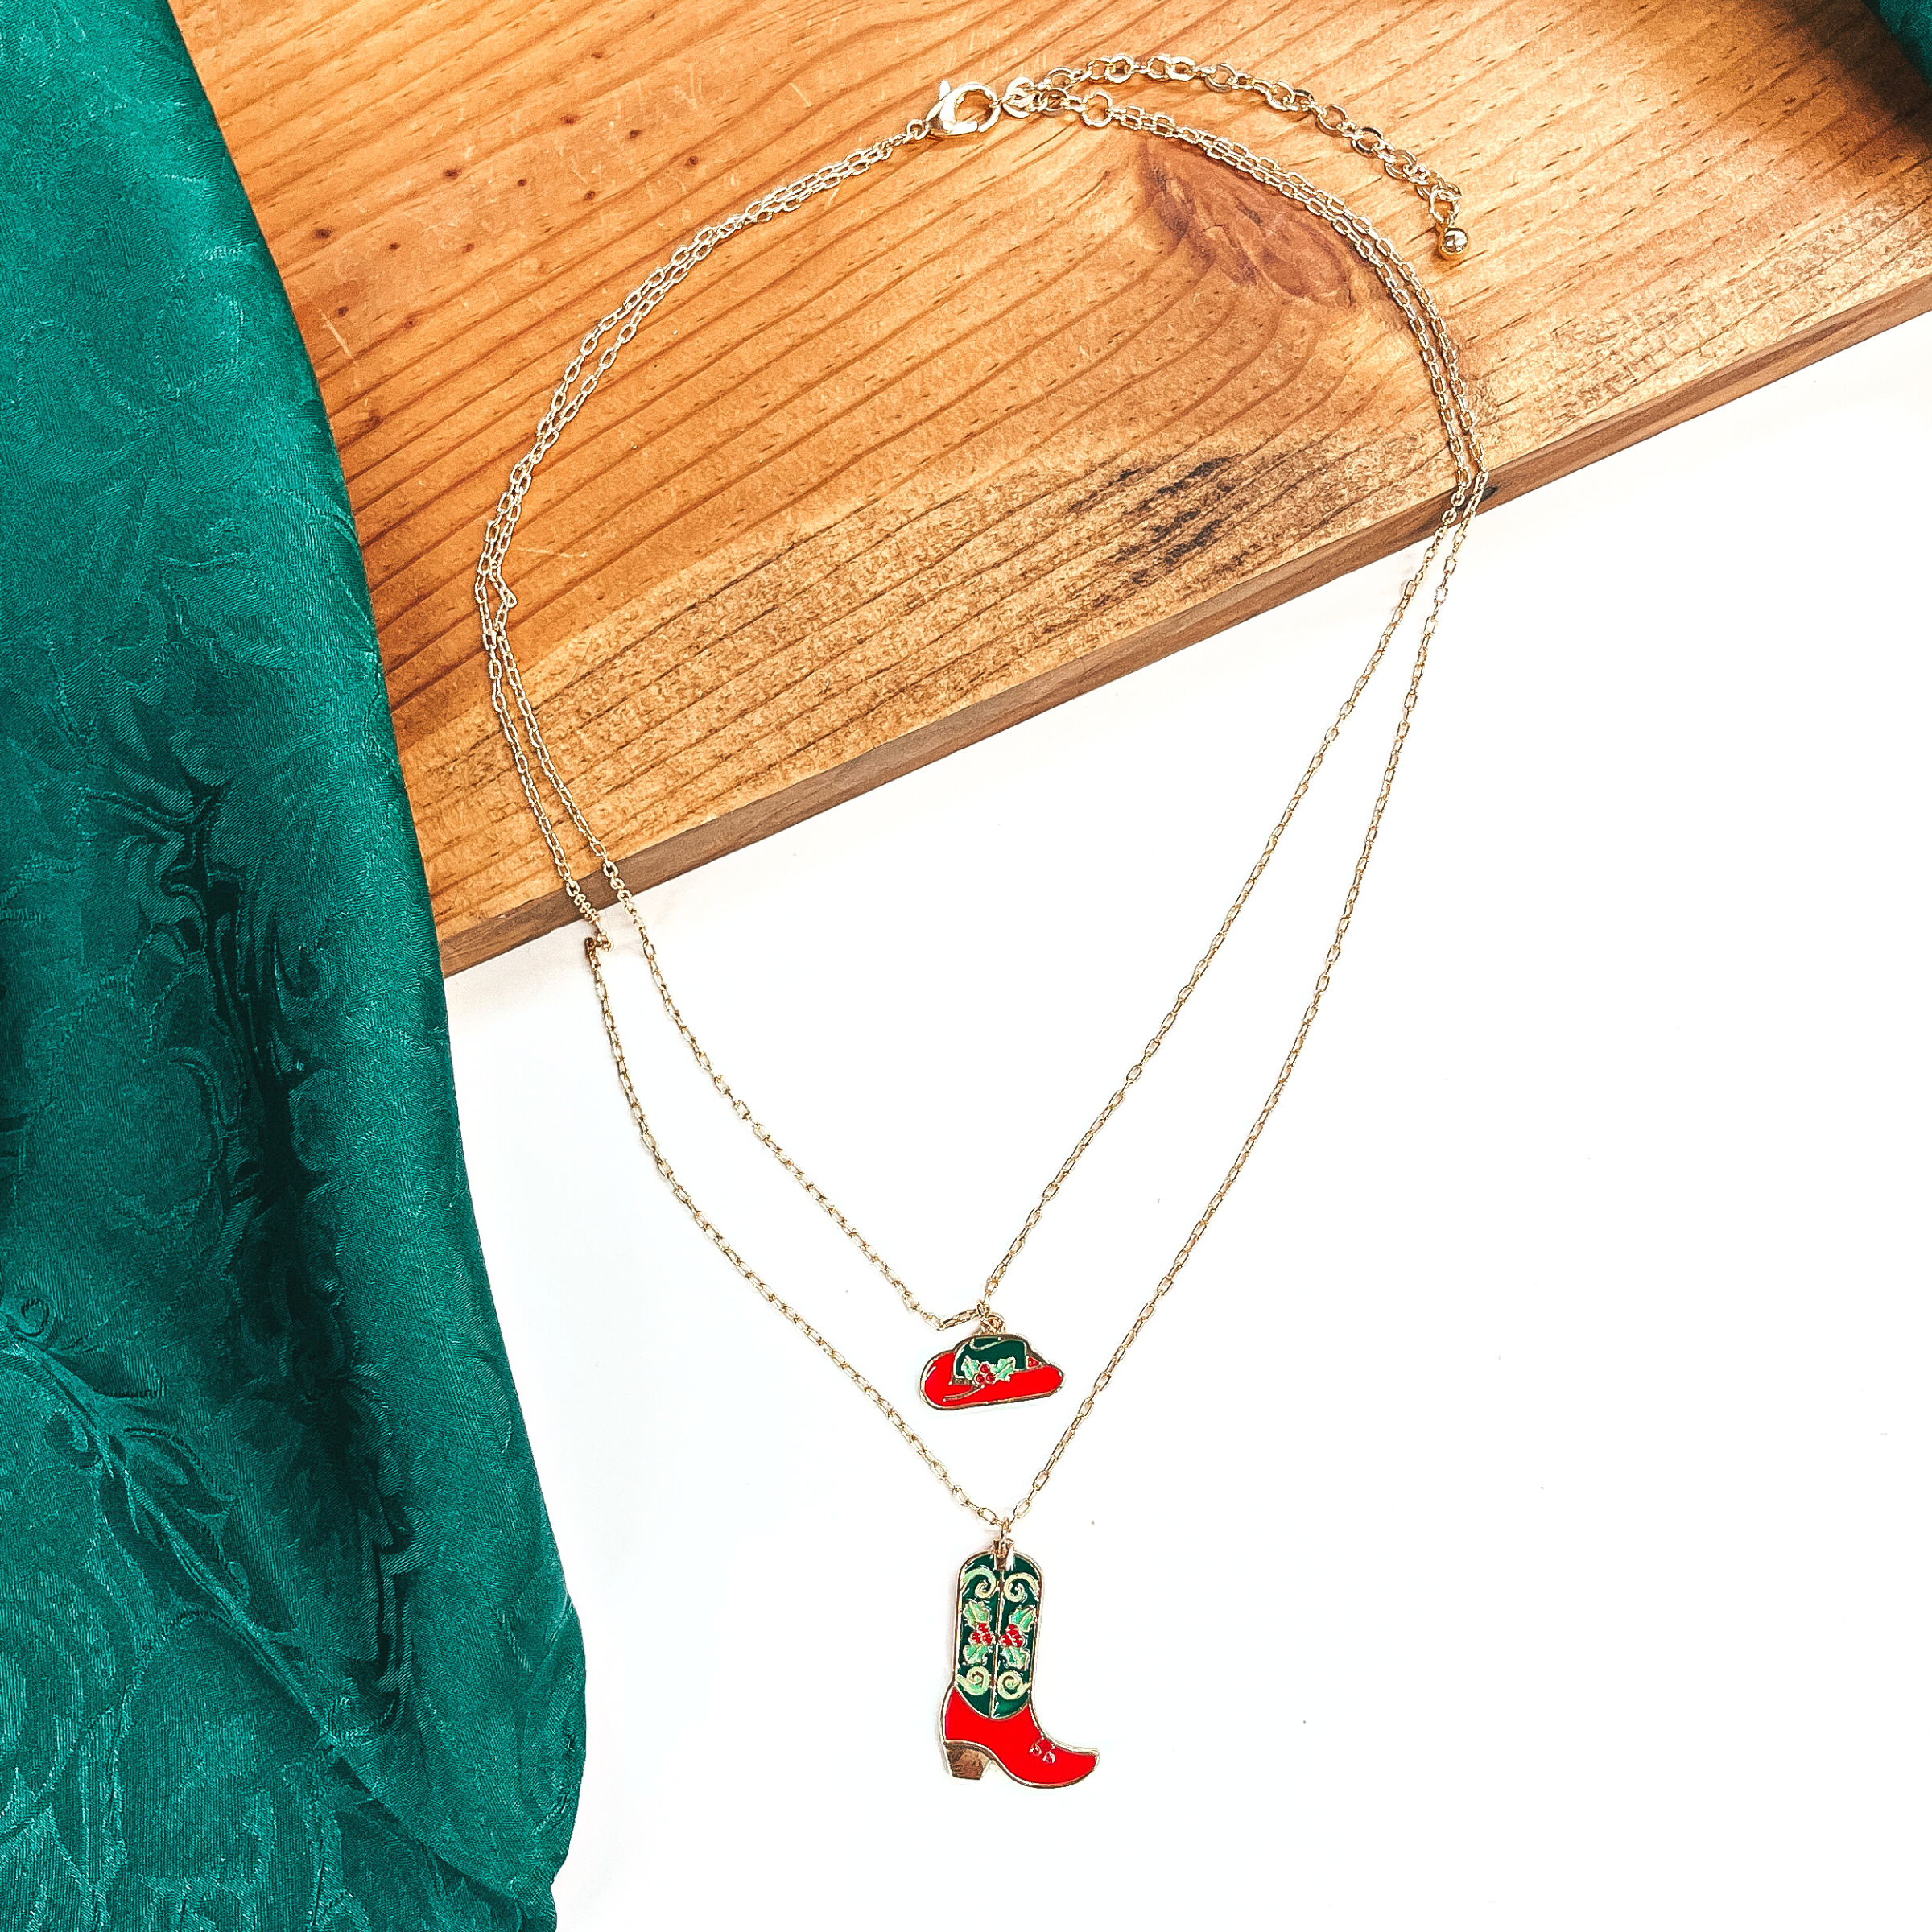 This is a double strand gold necklace with two hanging pendants.  The smaller strand has a hat pendant and the longer strand has a  boot pendant. Both pendants are red and dark green with mistletoe design  on them in a gold setting. This necklace is laying on a  white background and a slab of wood, with a green wild rag in the side as decor.